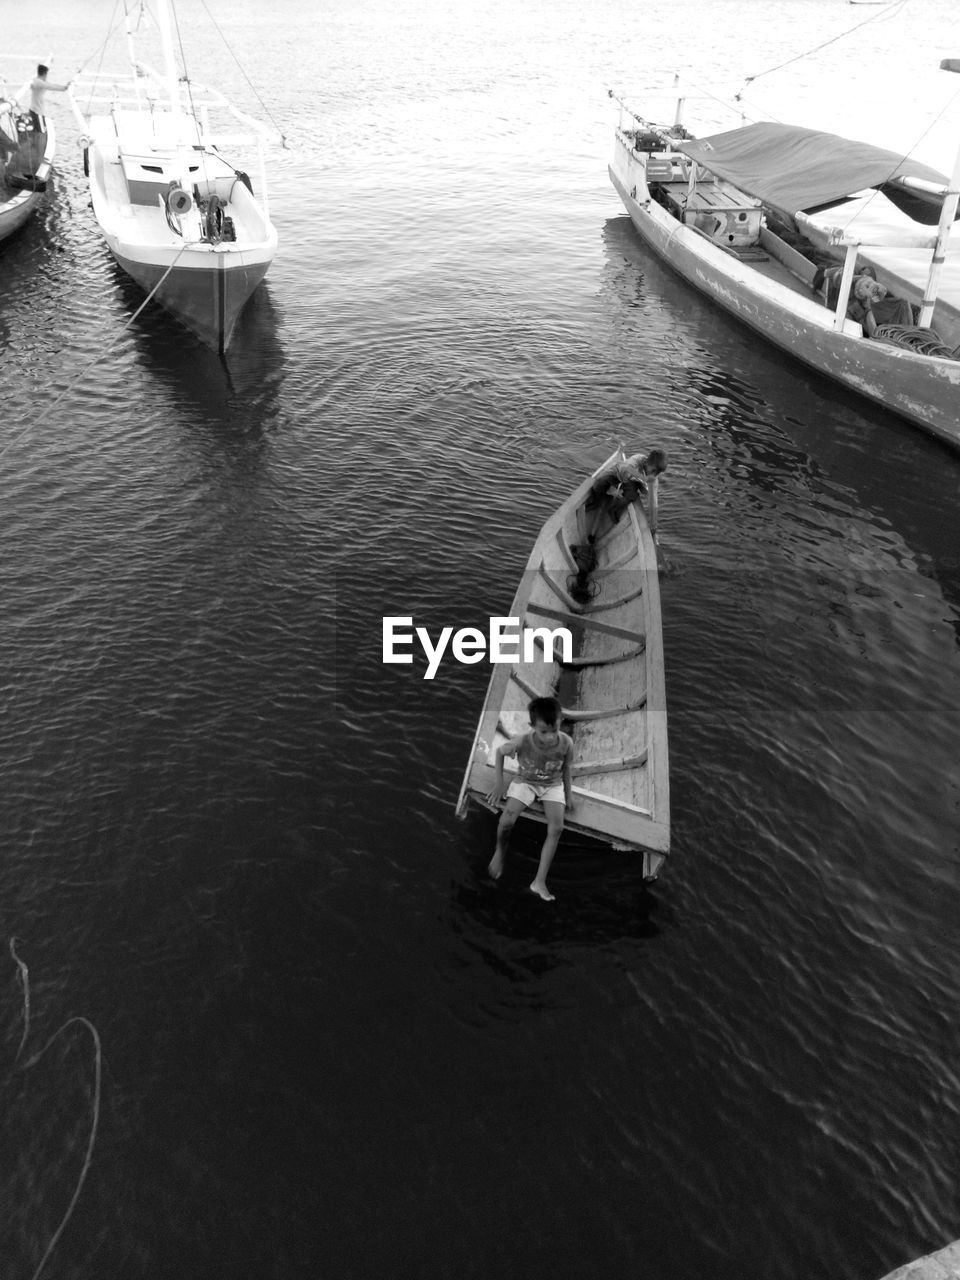 HIGH ANGLE VIEW OF MAN IN BOAT MOORED ON SEA